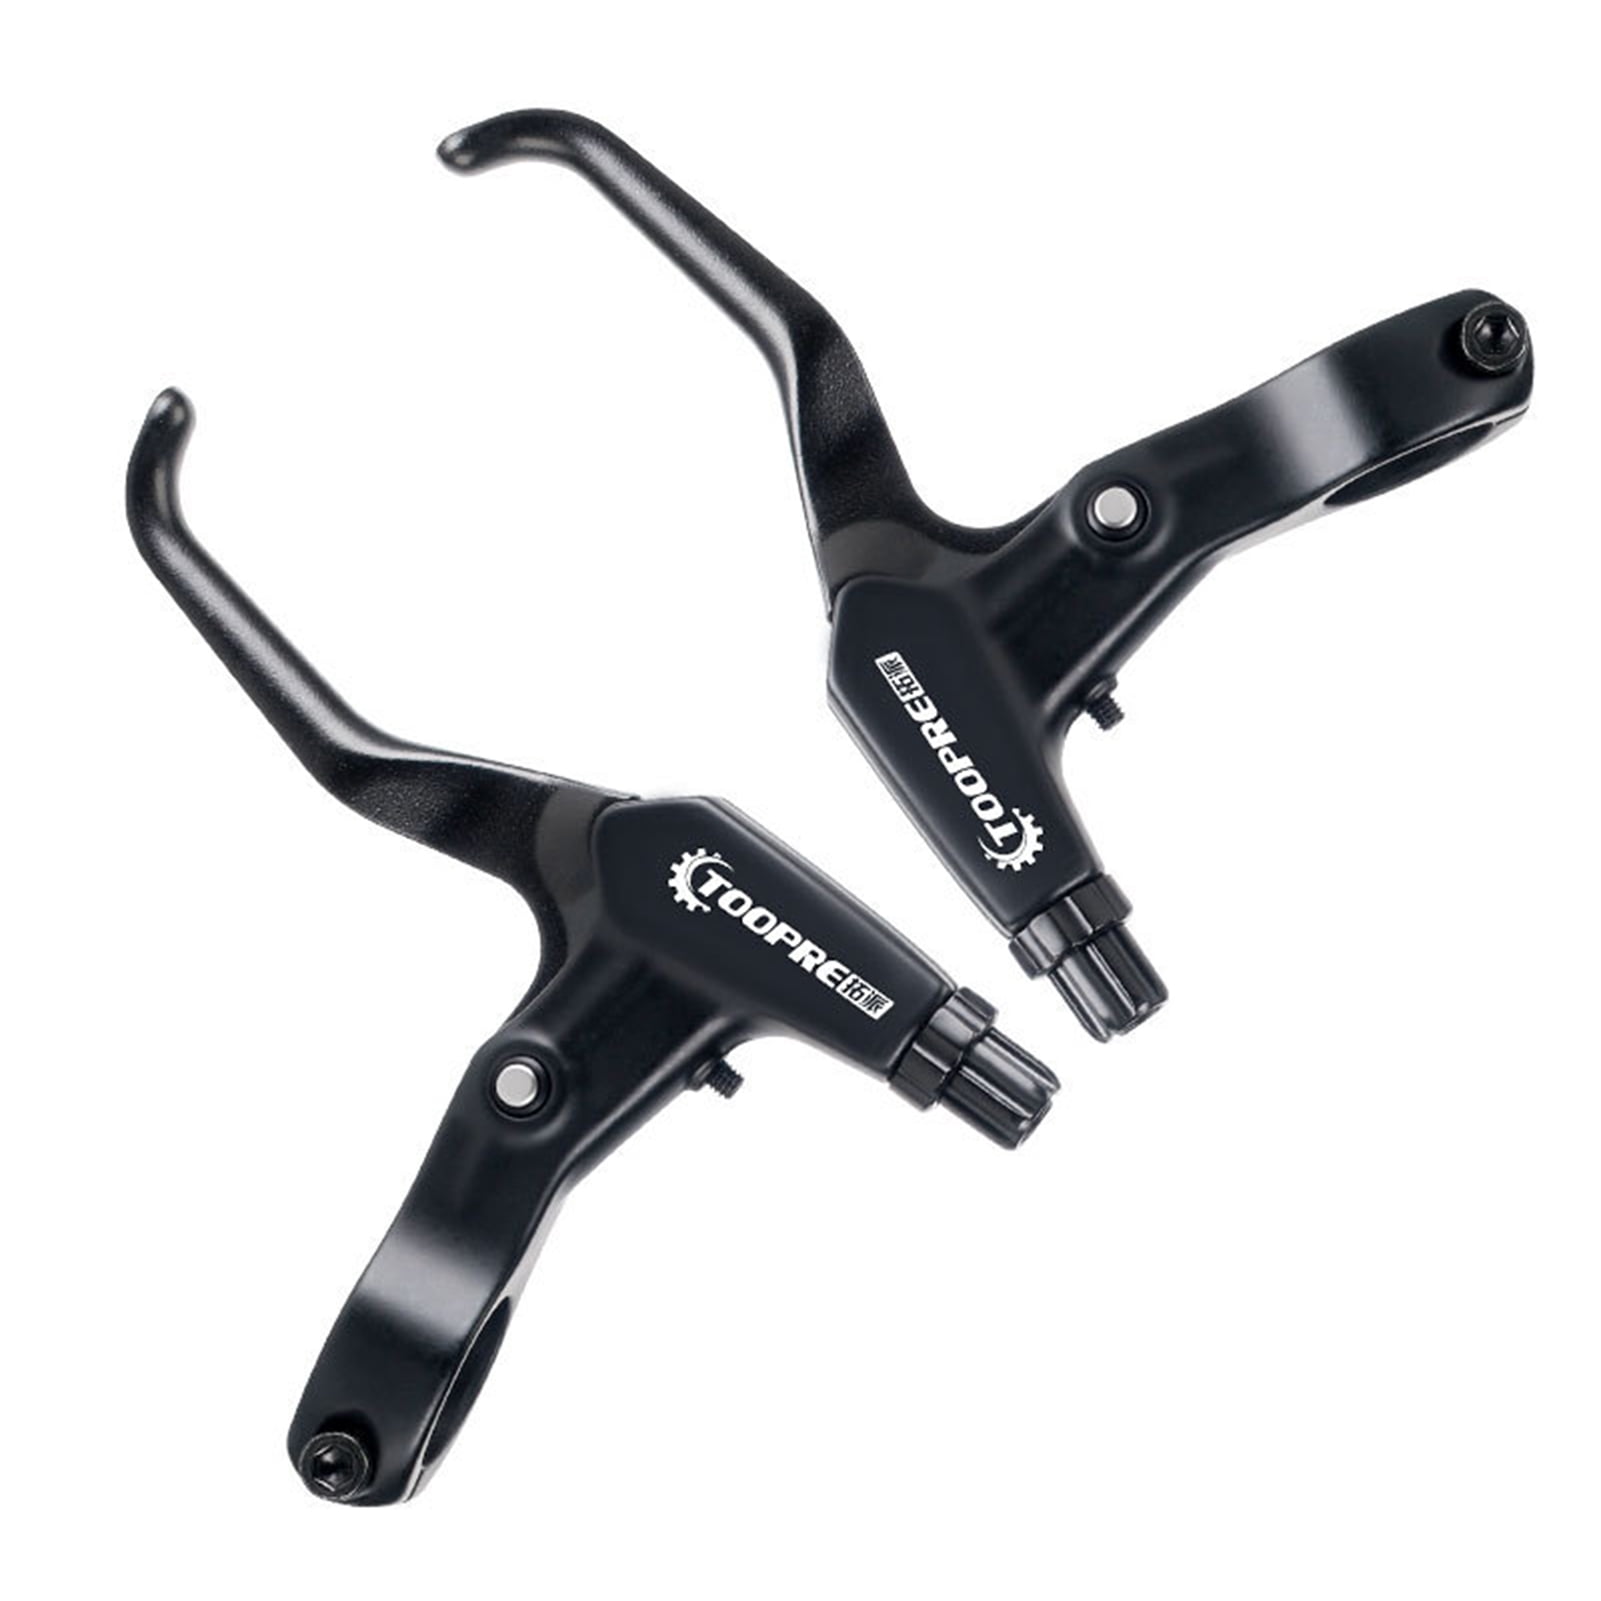 Lightweight ALLOY Brake Levers 2-finger Bike Bicycle BMX Various Colours New 